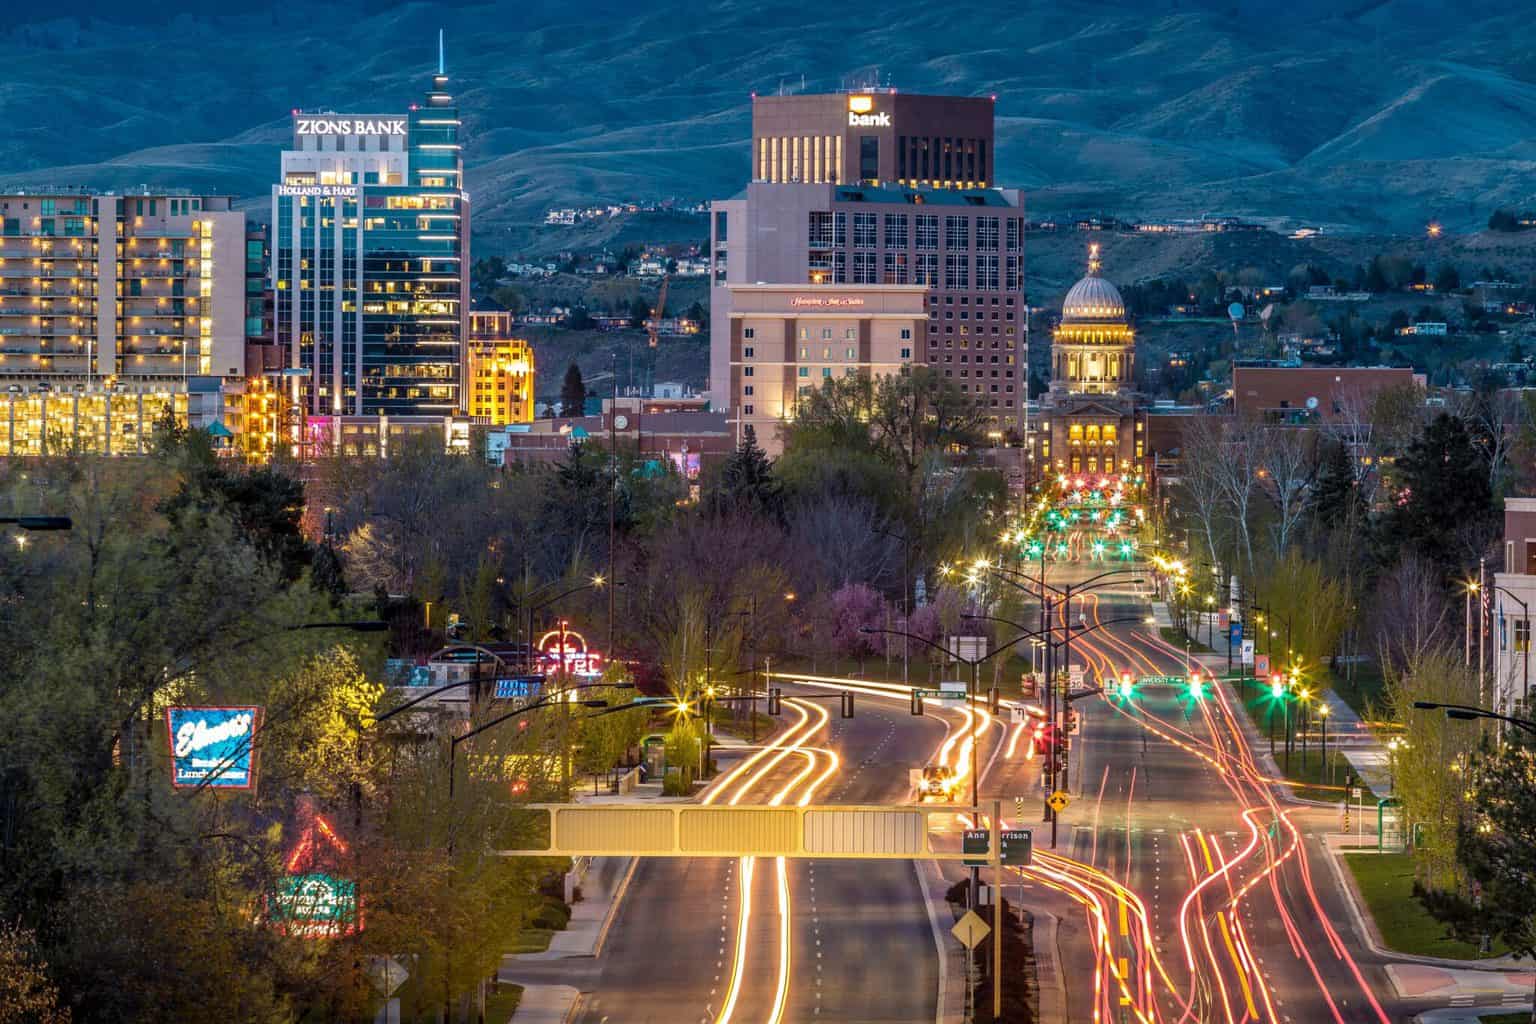 37 Fun Things To Do In Boise, Idaho A Local's Guide